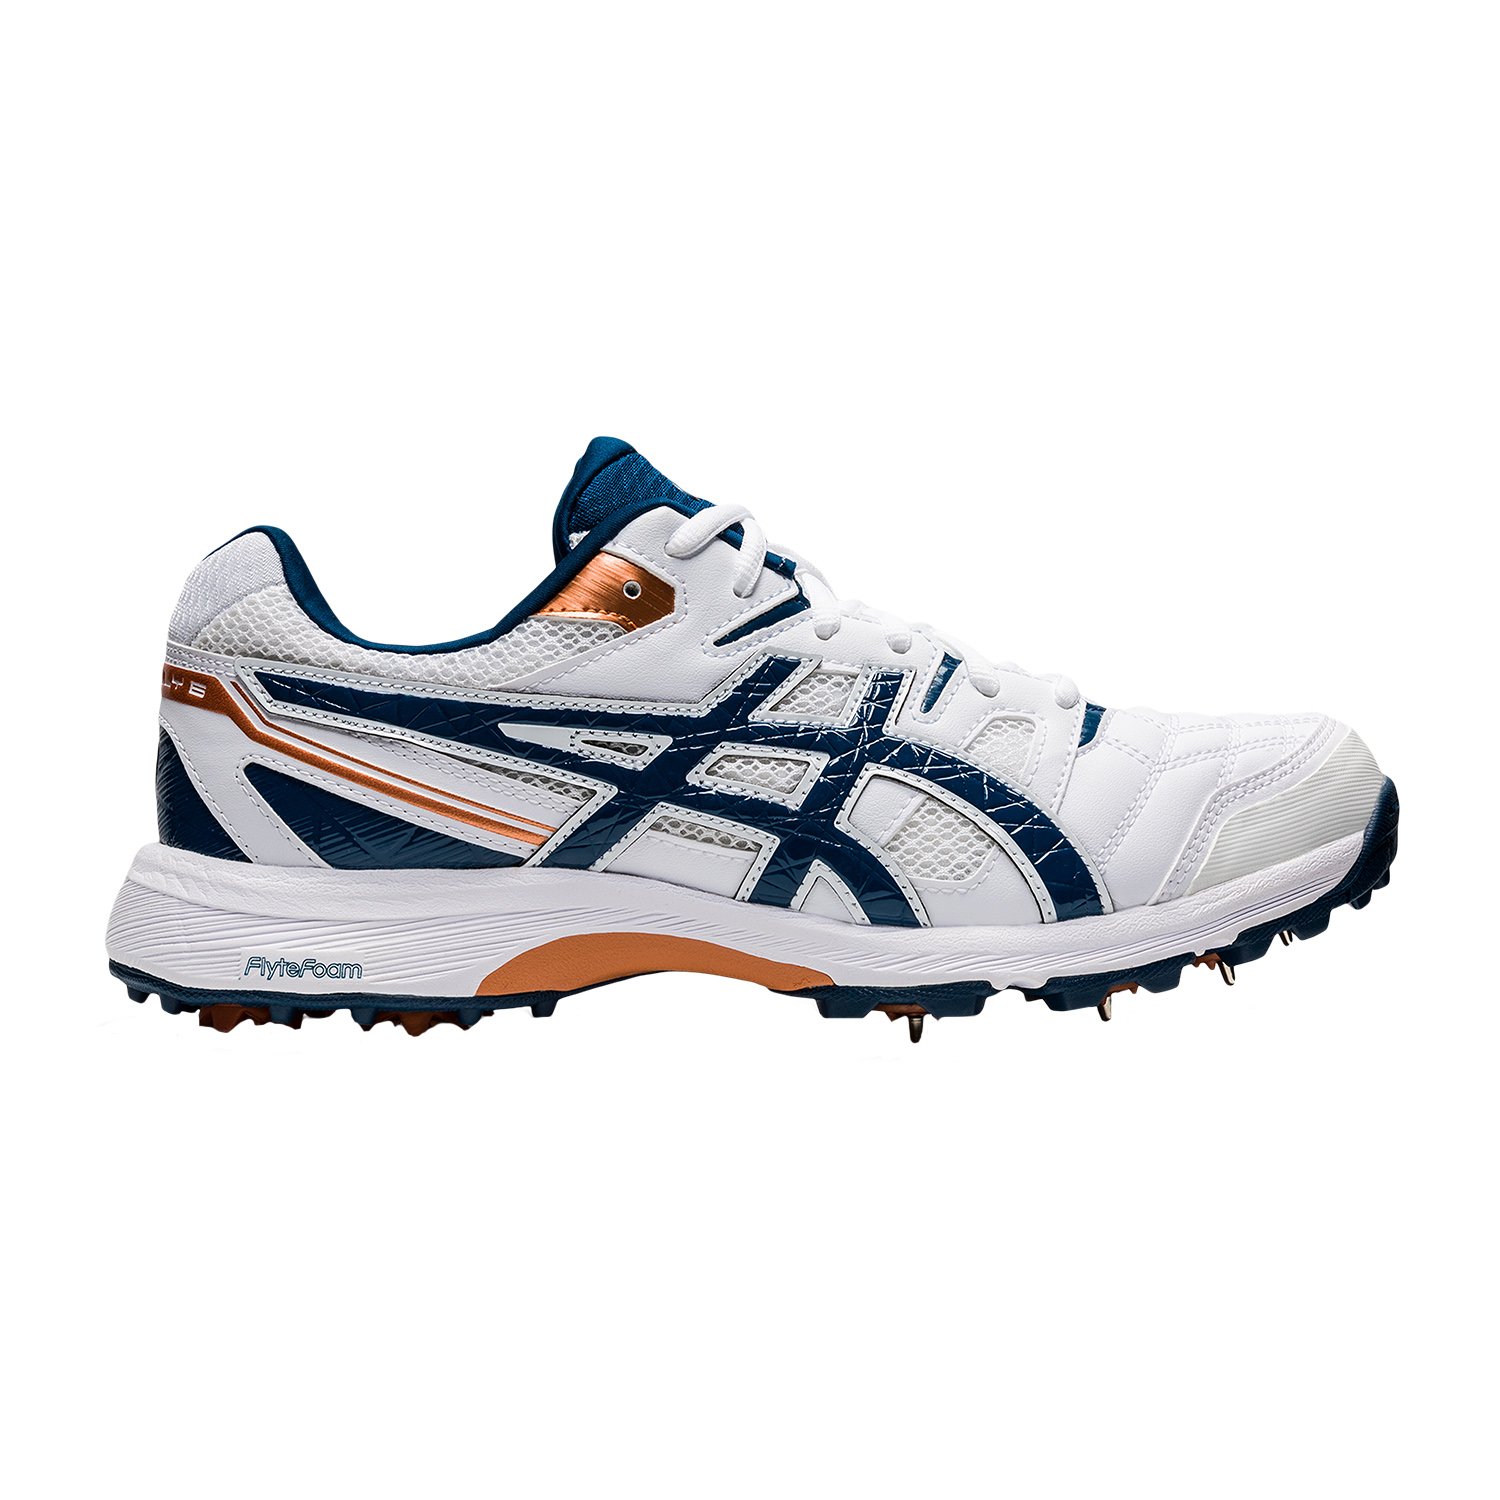 Gel-Gully 6 Spike Shoes (21/22) - Shoes | Cricket Express - Asics 2021/22